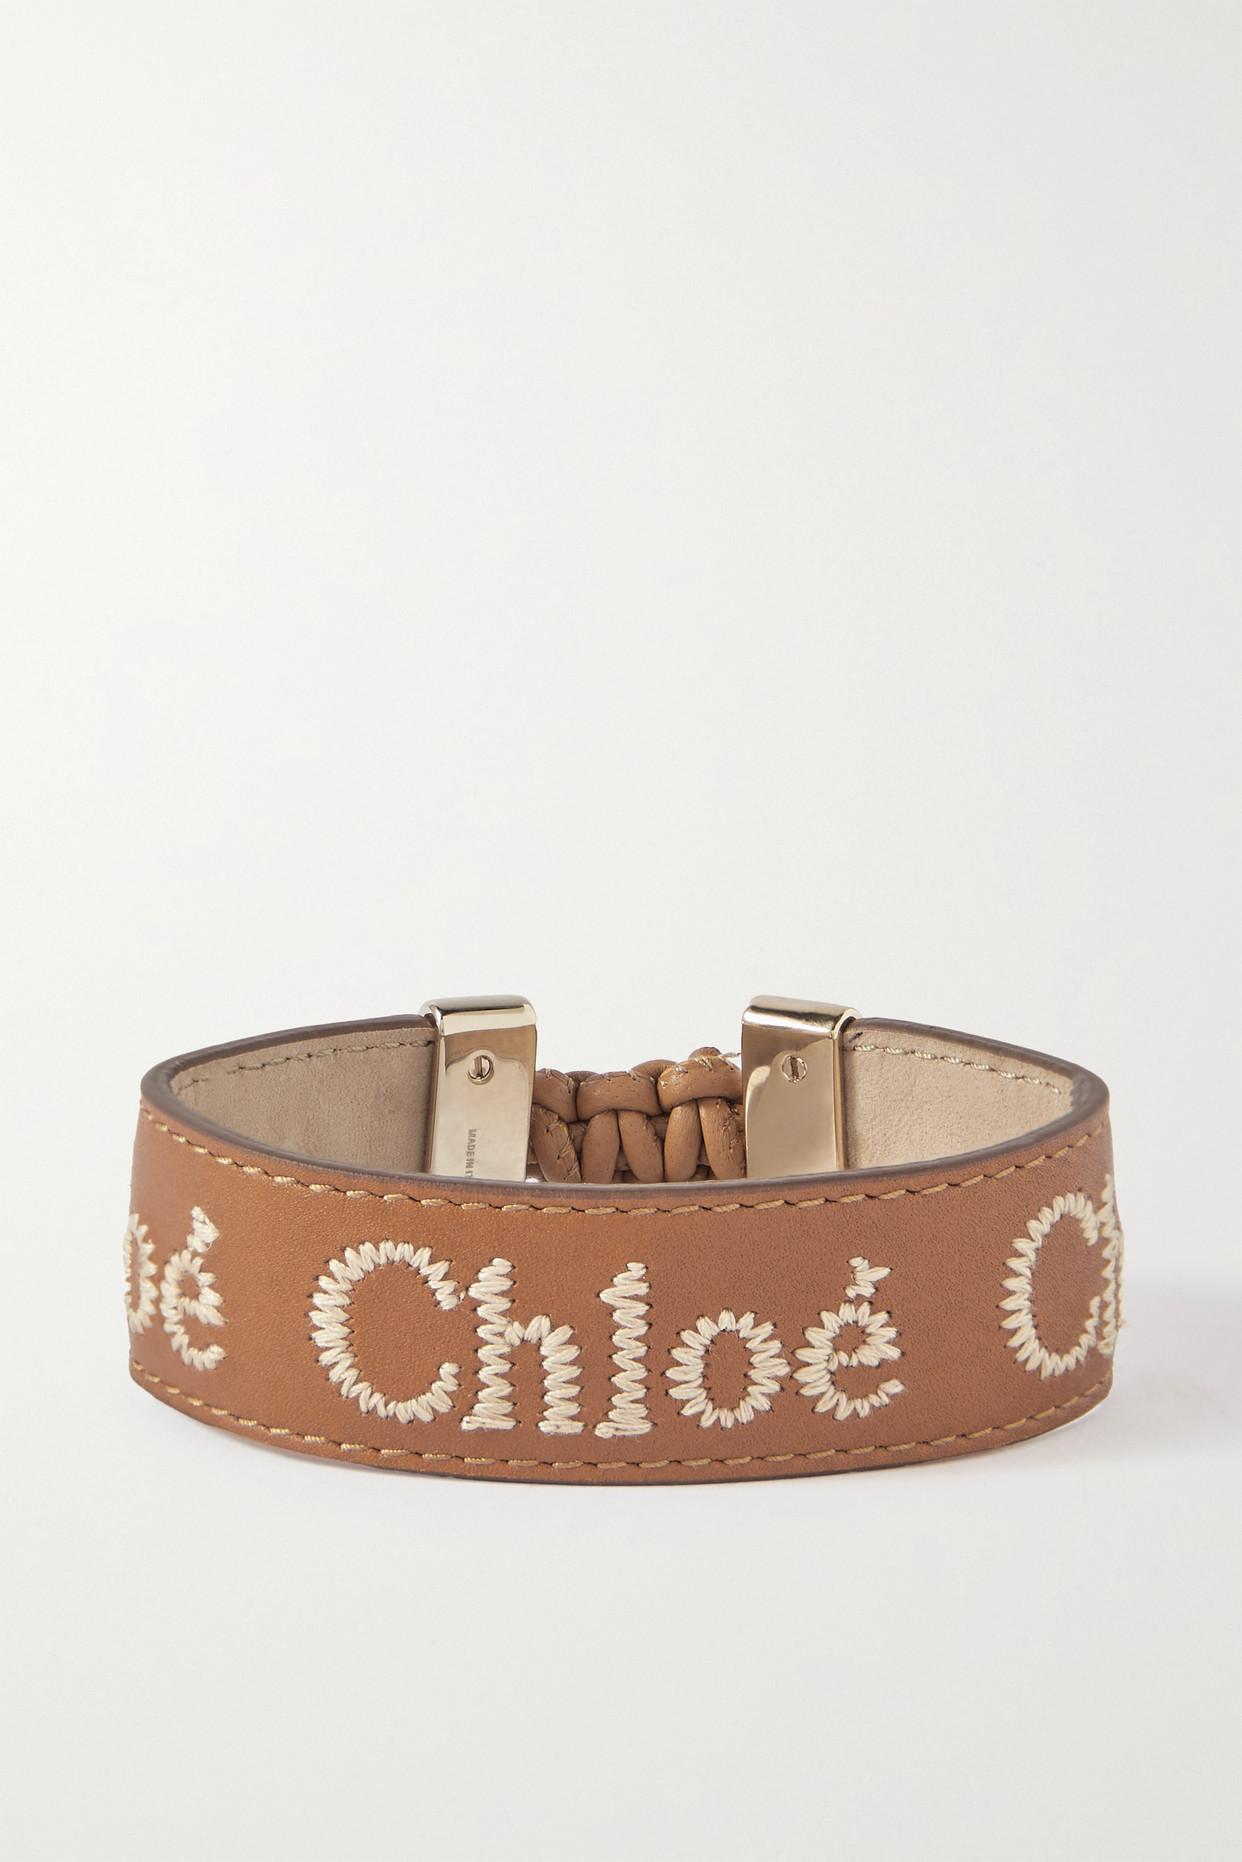 Chloé + Net Sustain Woody Embroidered Leather And Gold-tone Bracelet in  Brown | Lyst